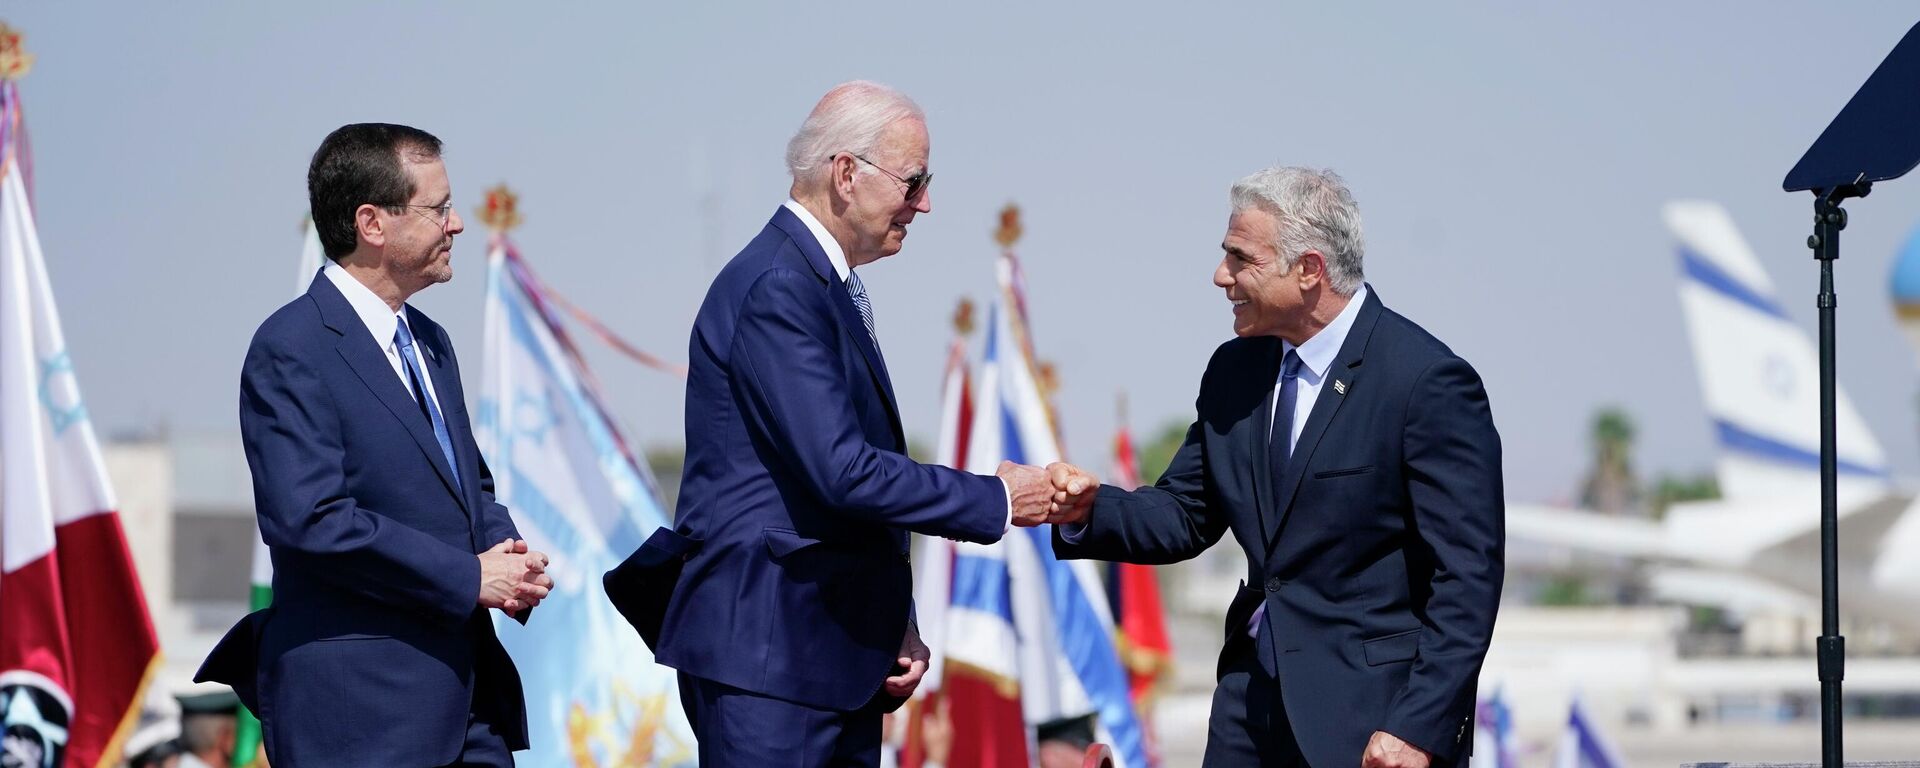 President Joe Biden is greeted by Israeli Prime Minister Yair Lapid, right and President Isaac Herzog, left, as they participate in an arrival ceremony after Biden arrived at Ben Gurion Airport, Wednesday, July 13, 2022, in Tel Aviv.  - Sputnik International, 1920, 27.10.2022